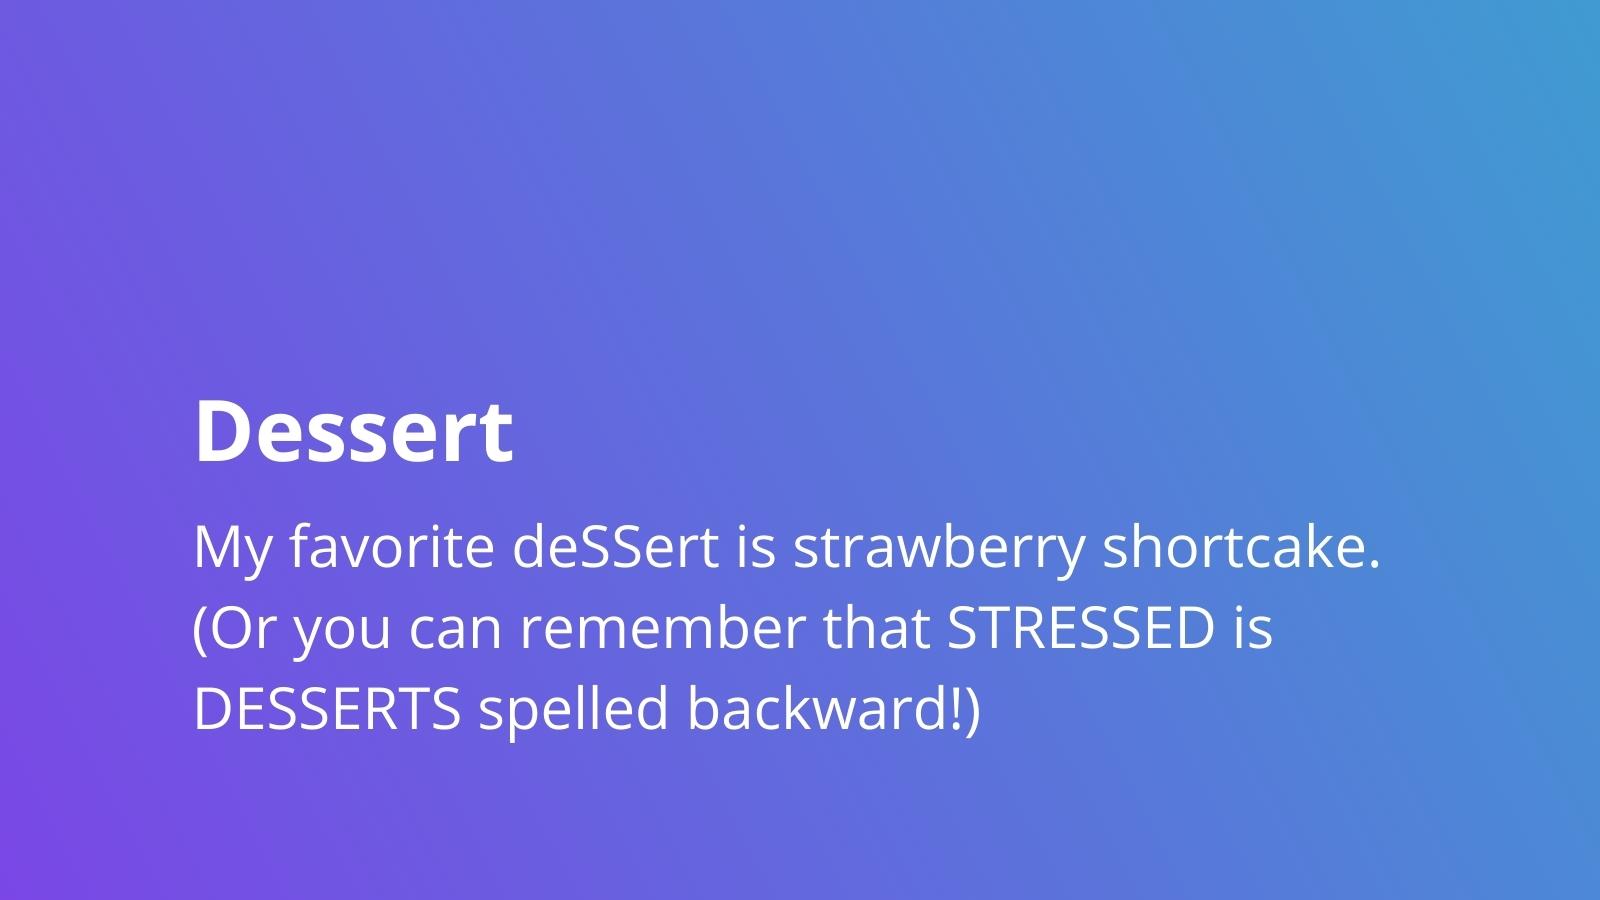 Dessert - My favorite deSSert is strawberry shortcake. (Or you can remember that STRESSED is DESSERTS spelled backward!)